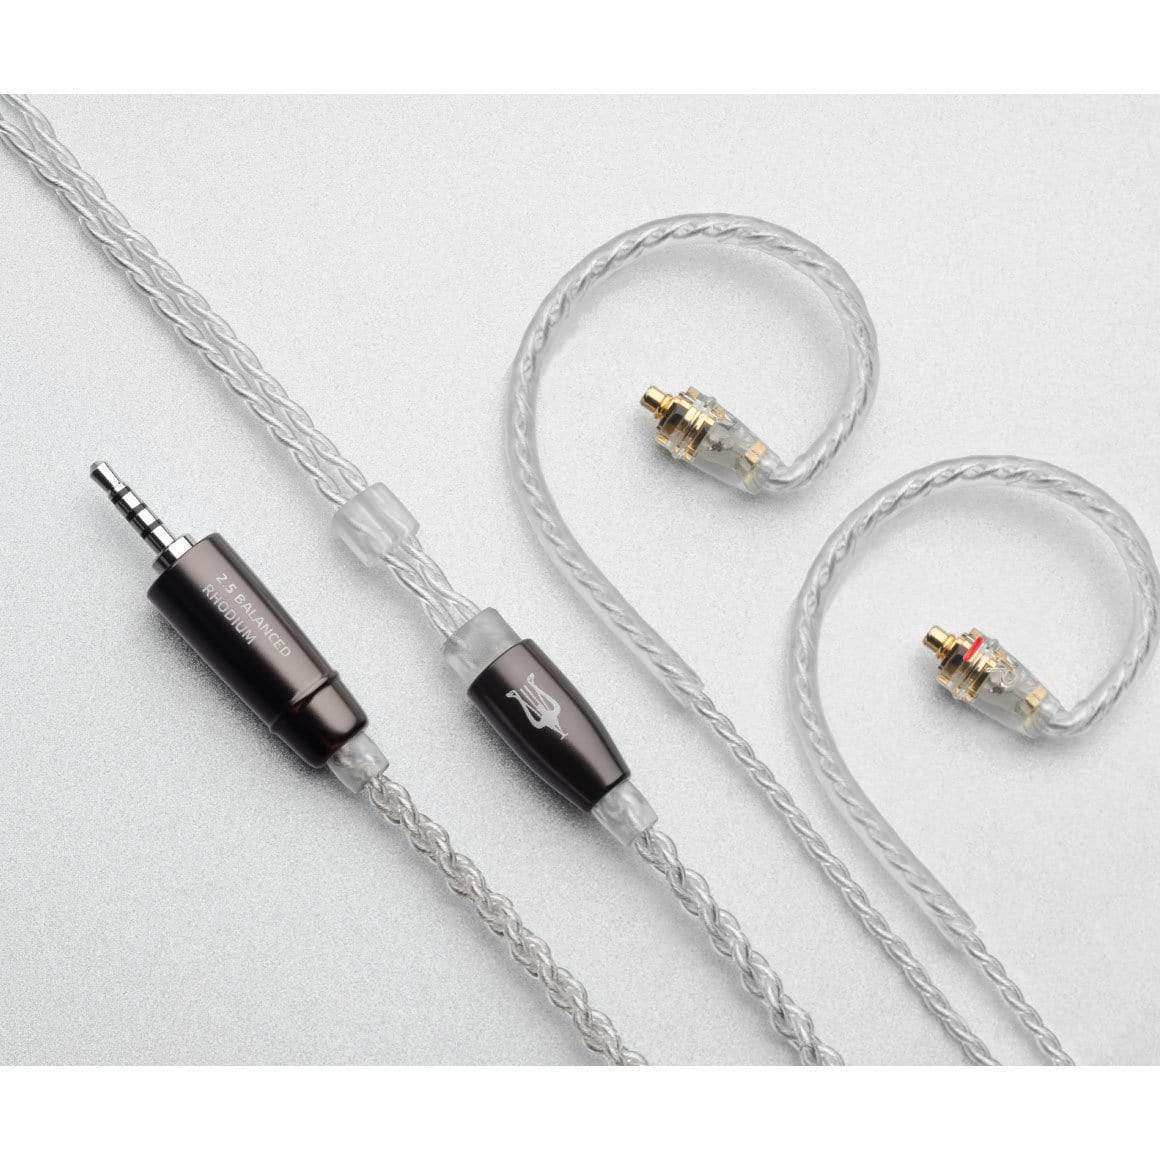 Meze - MMCX to 2.5mm Balanced Silver Plated Upgrade Cable